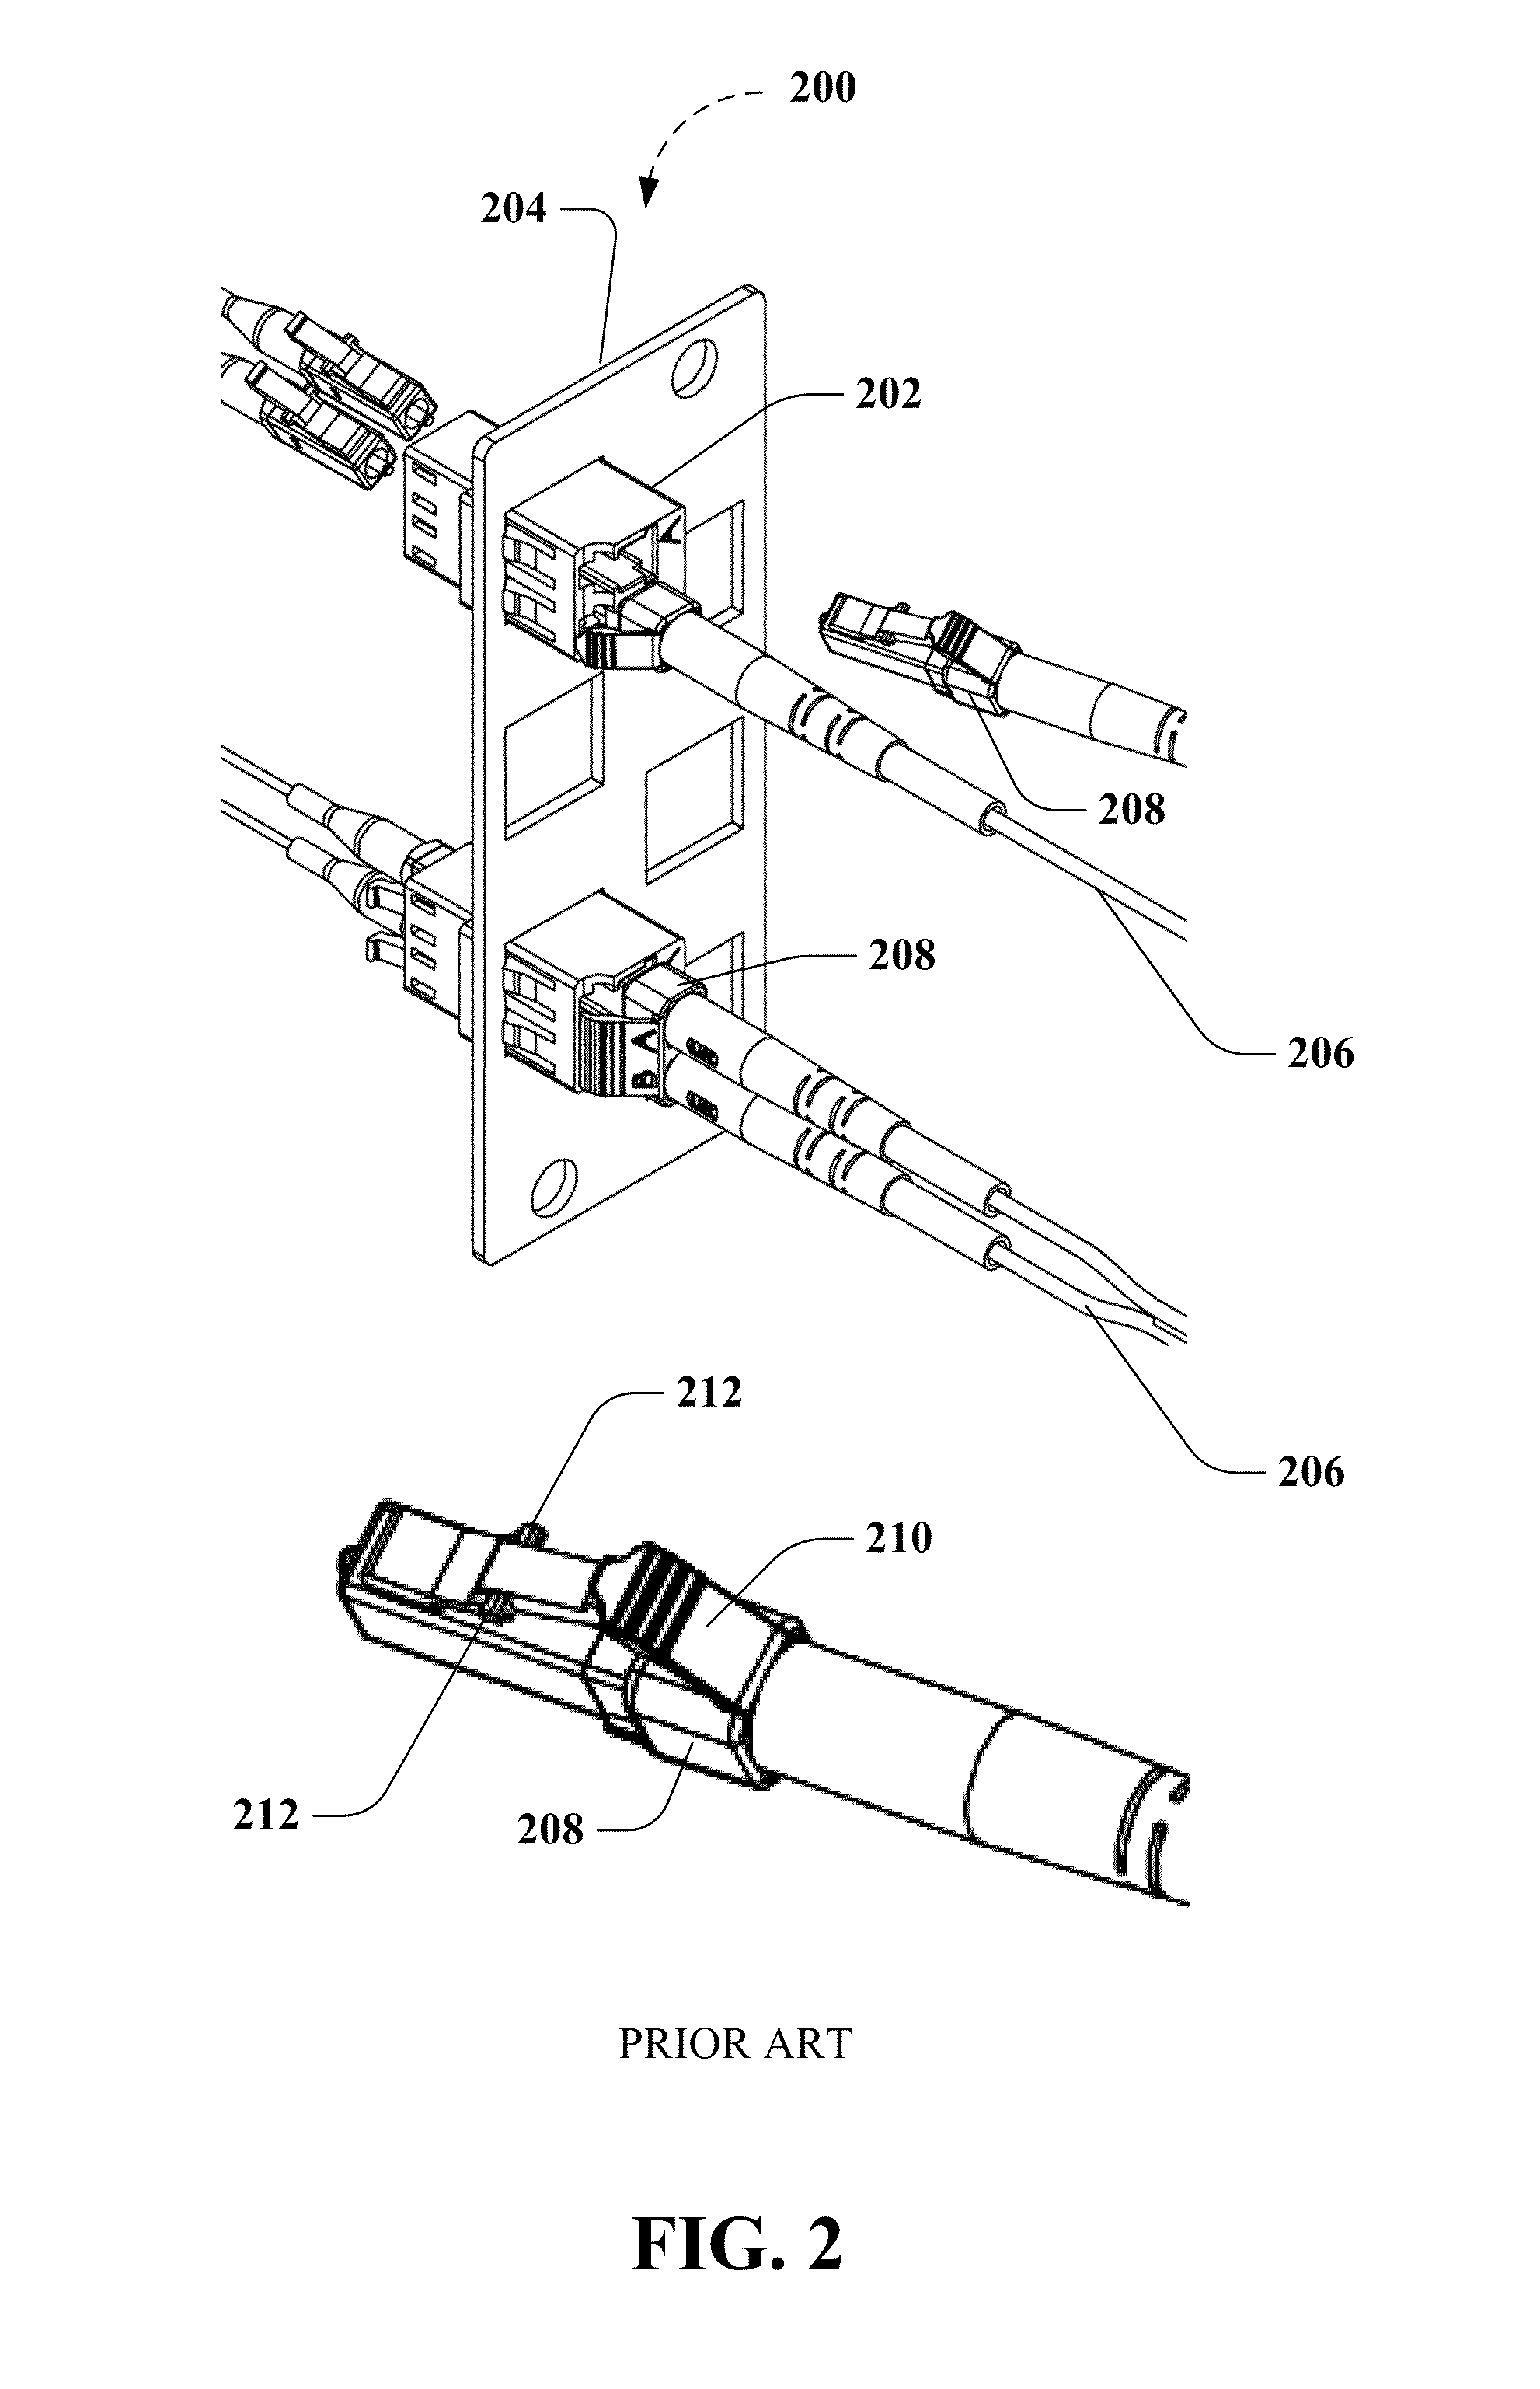 Tamper prevention system having a shroud to partially cover a release mechanism